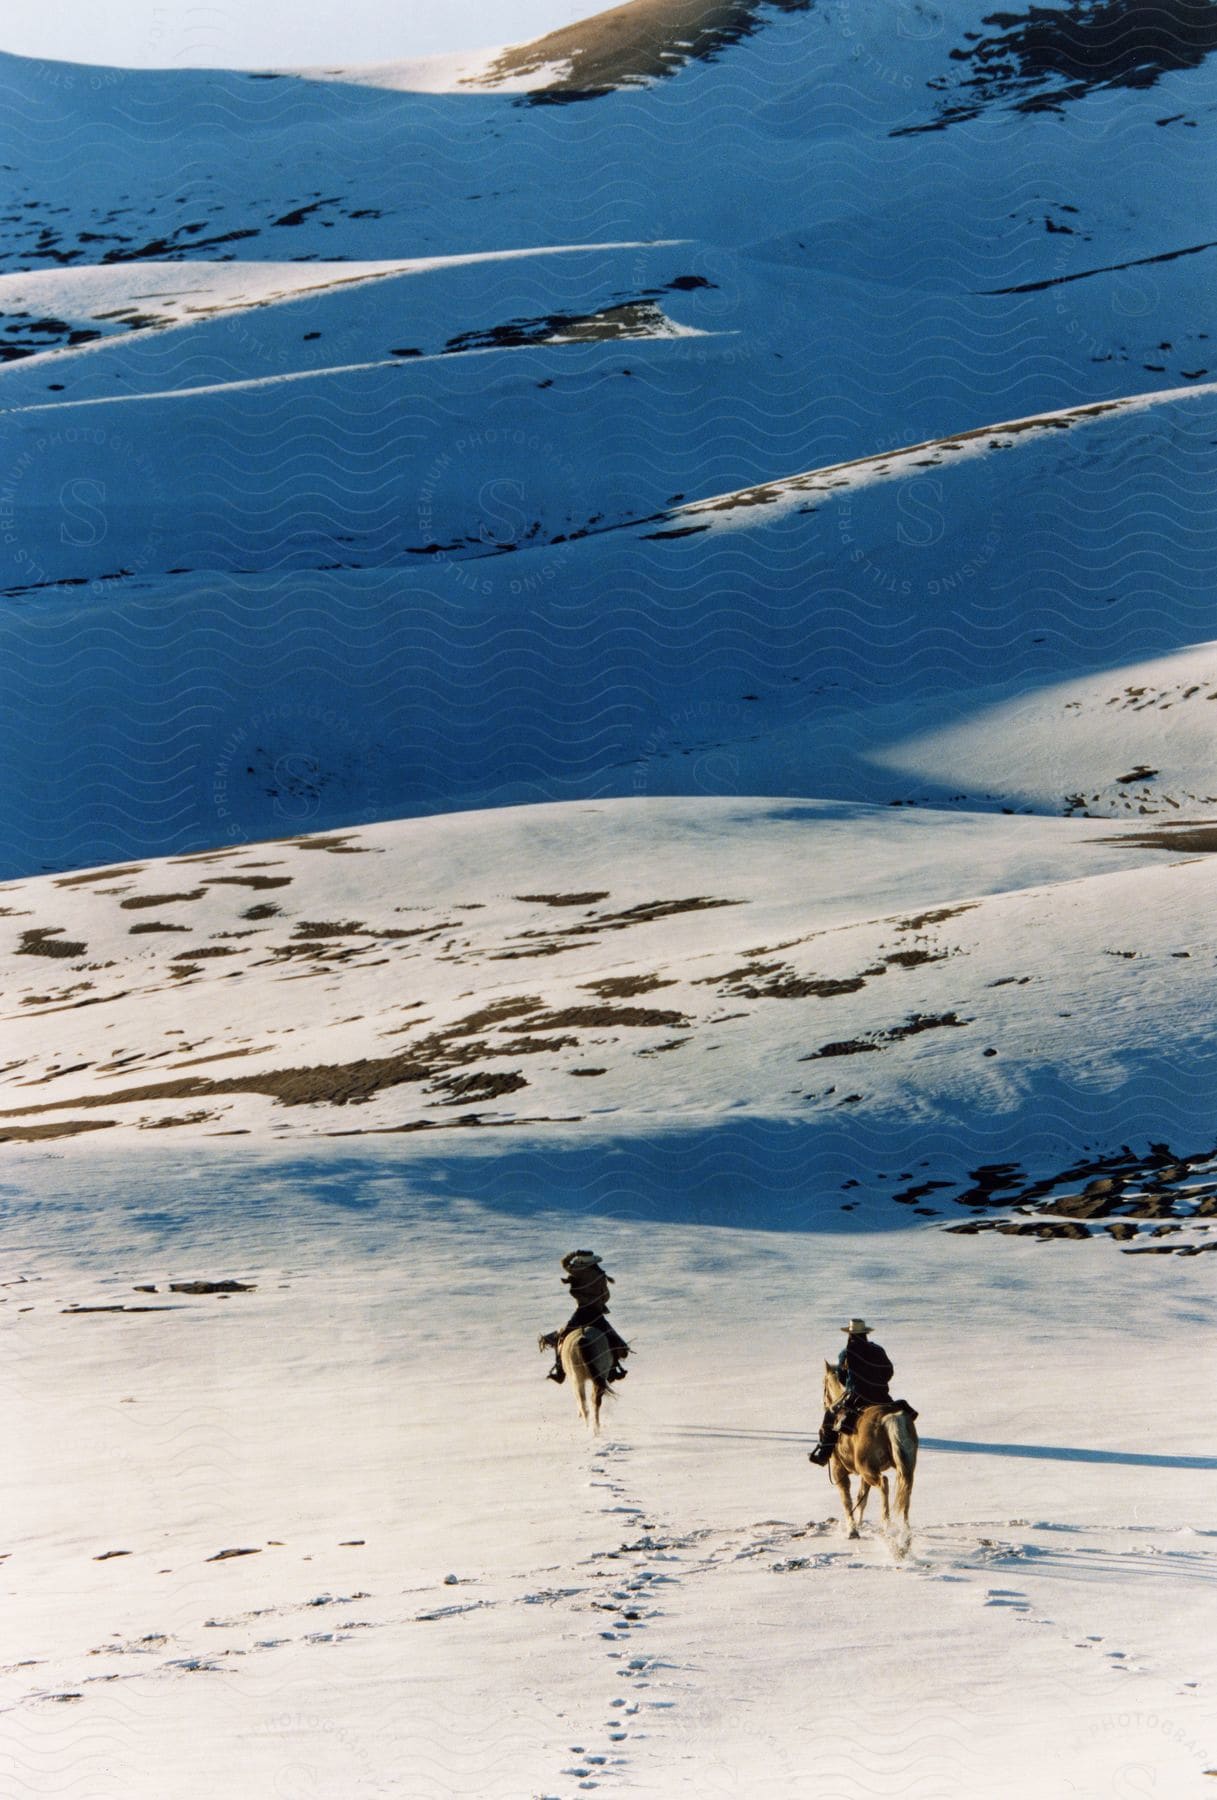 Two people riding horses in a mountain ranch land area covered in snow.